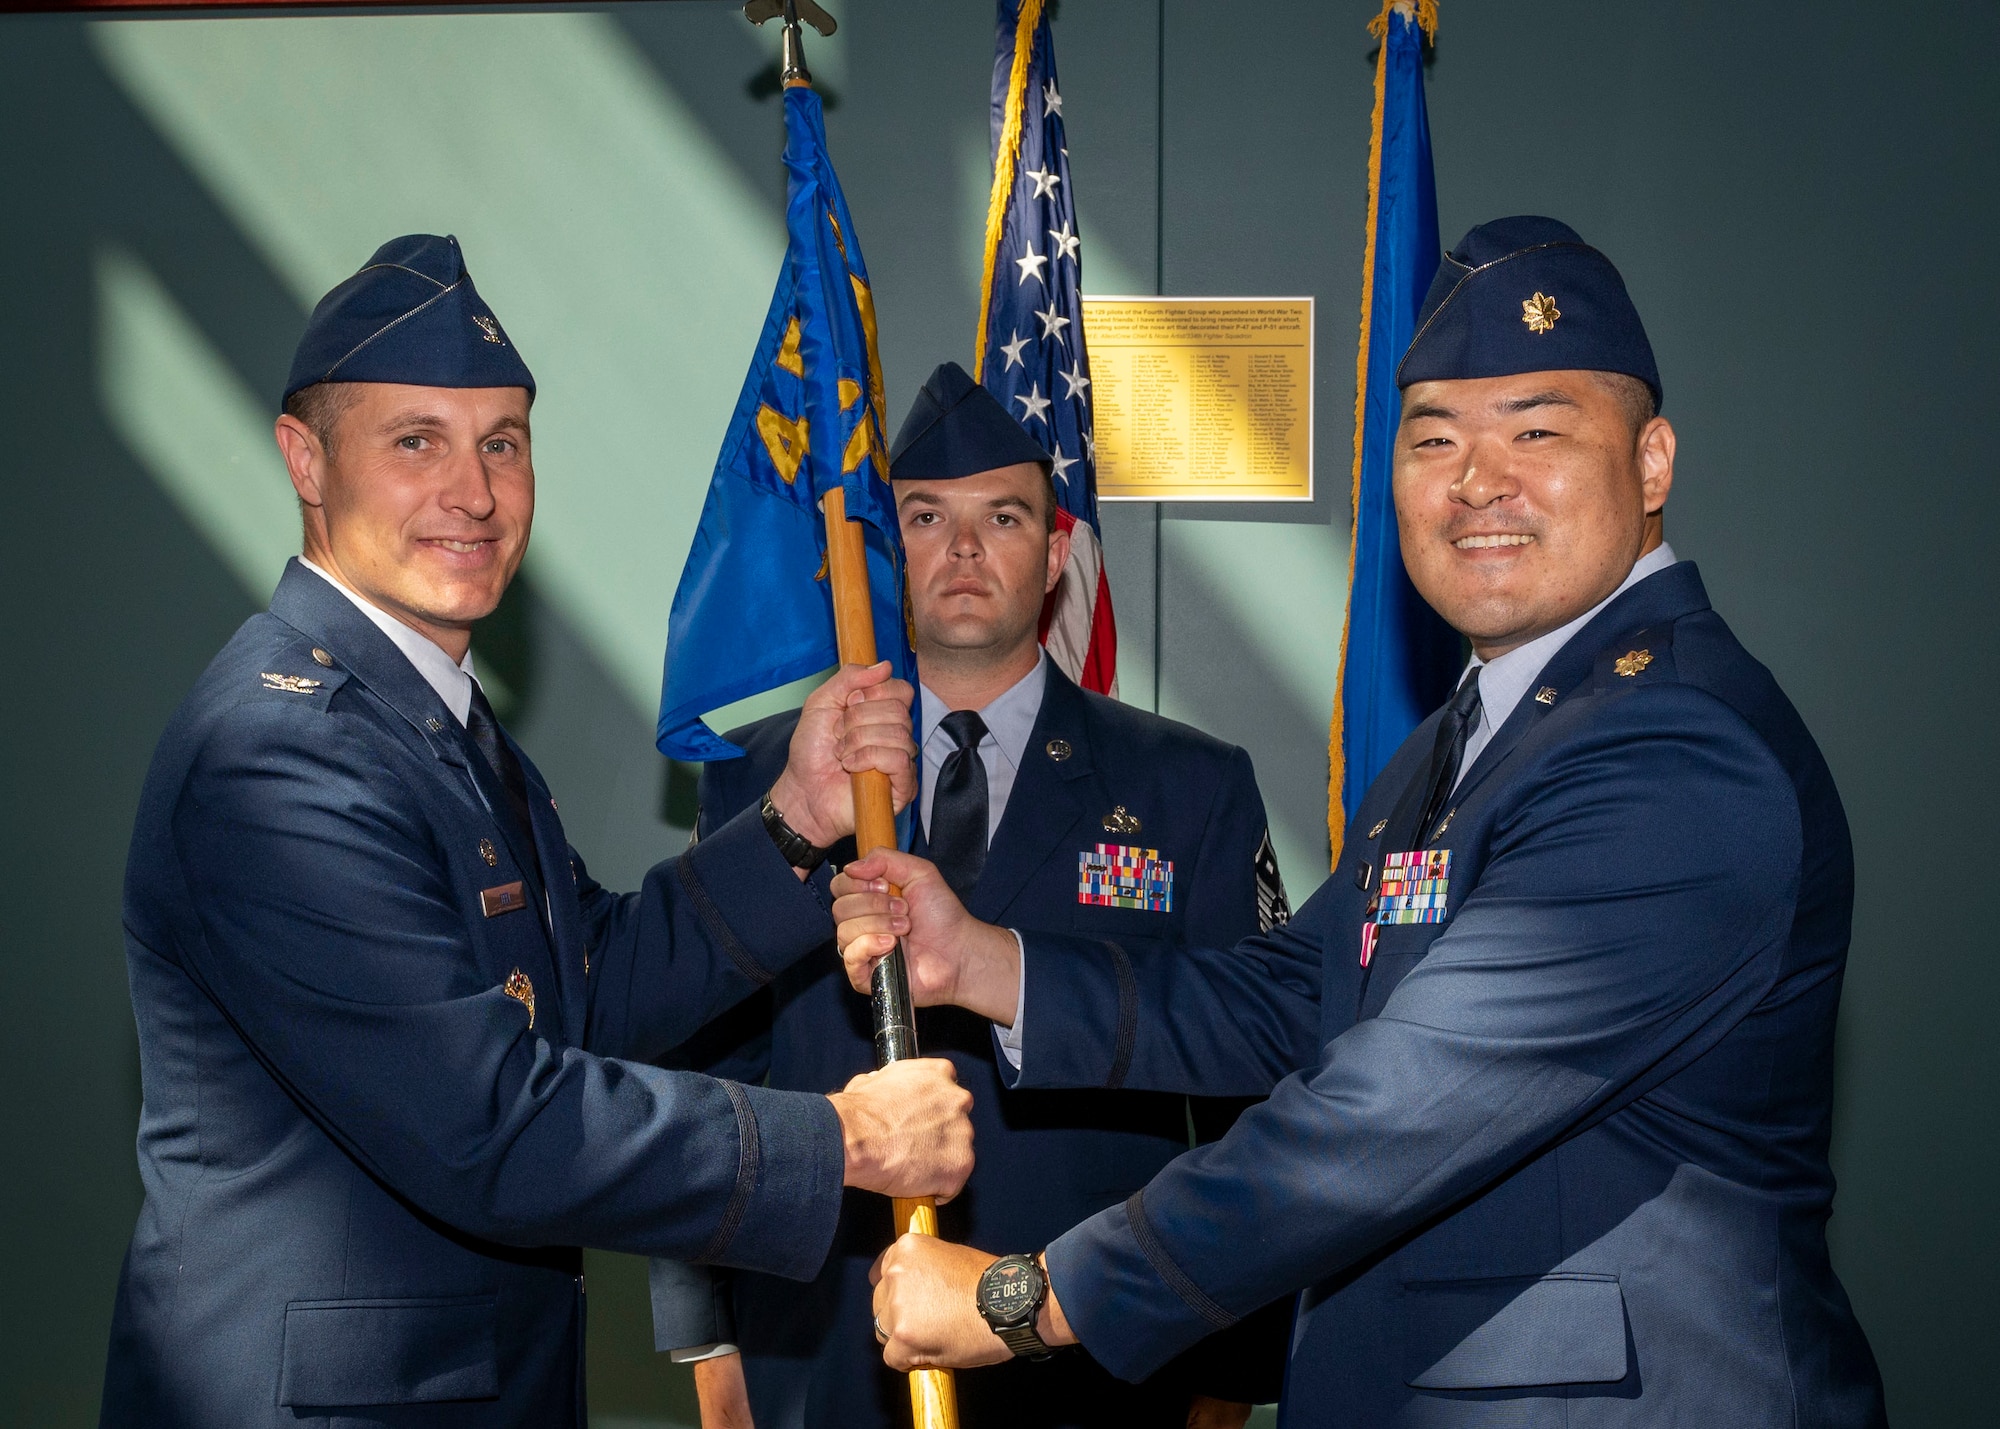 Maj. Samuel Han, right, outgoing 4th Comptroller Squadron commander, relinquishes the guidon to Col. Lucas Teel, 4th Fighter Wing commander, during the 4th CPTS change of command ceremony at Seymour Johnson Air Force Base, North Carolina, June 24, 2022.